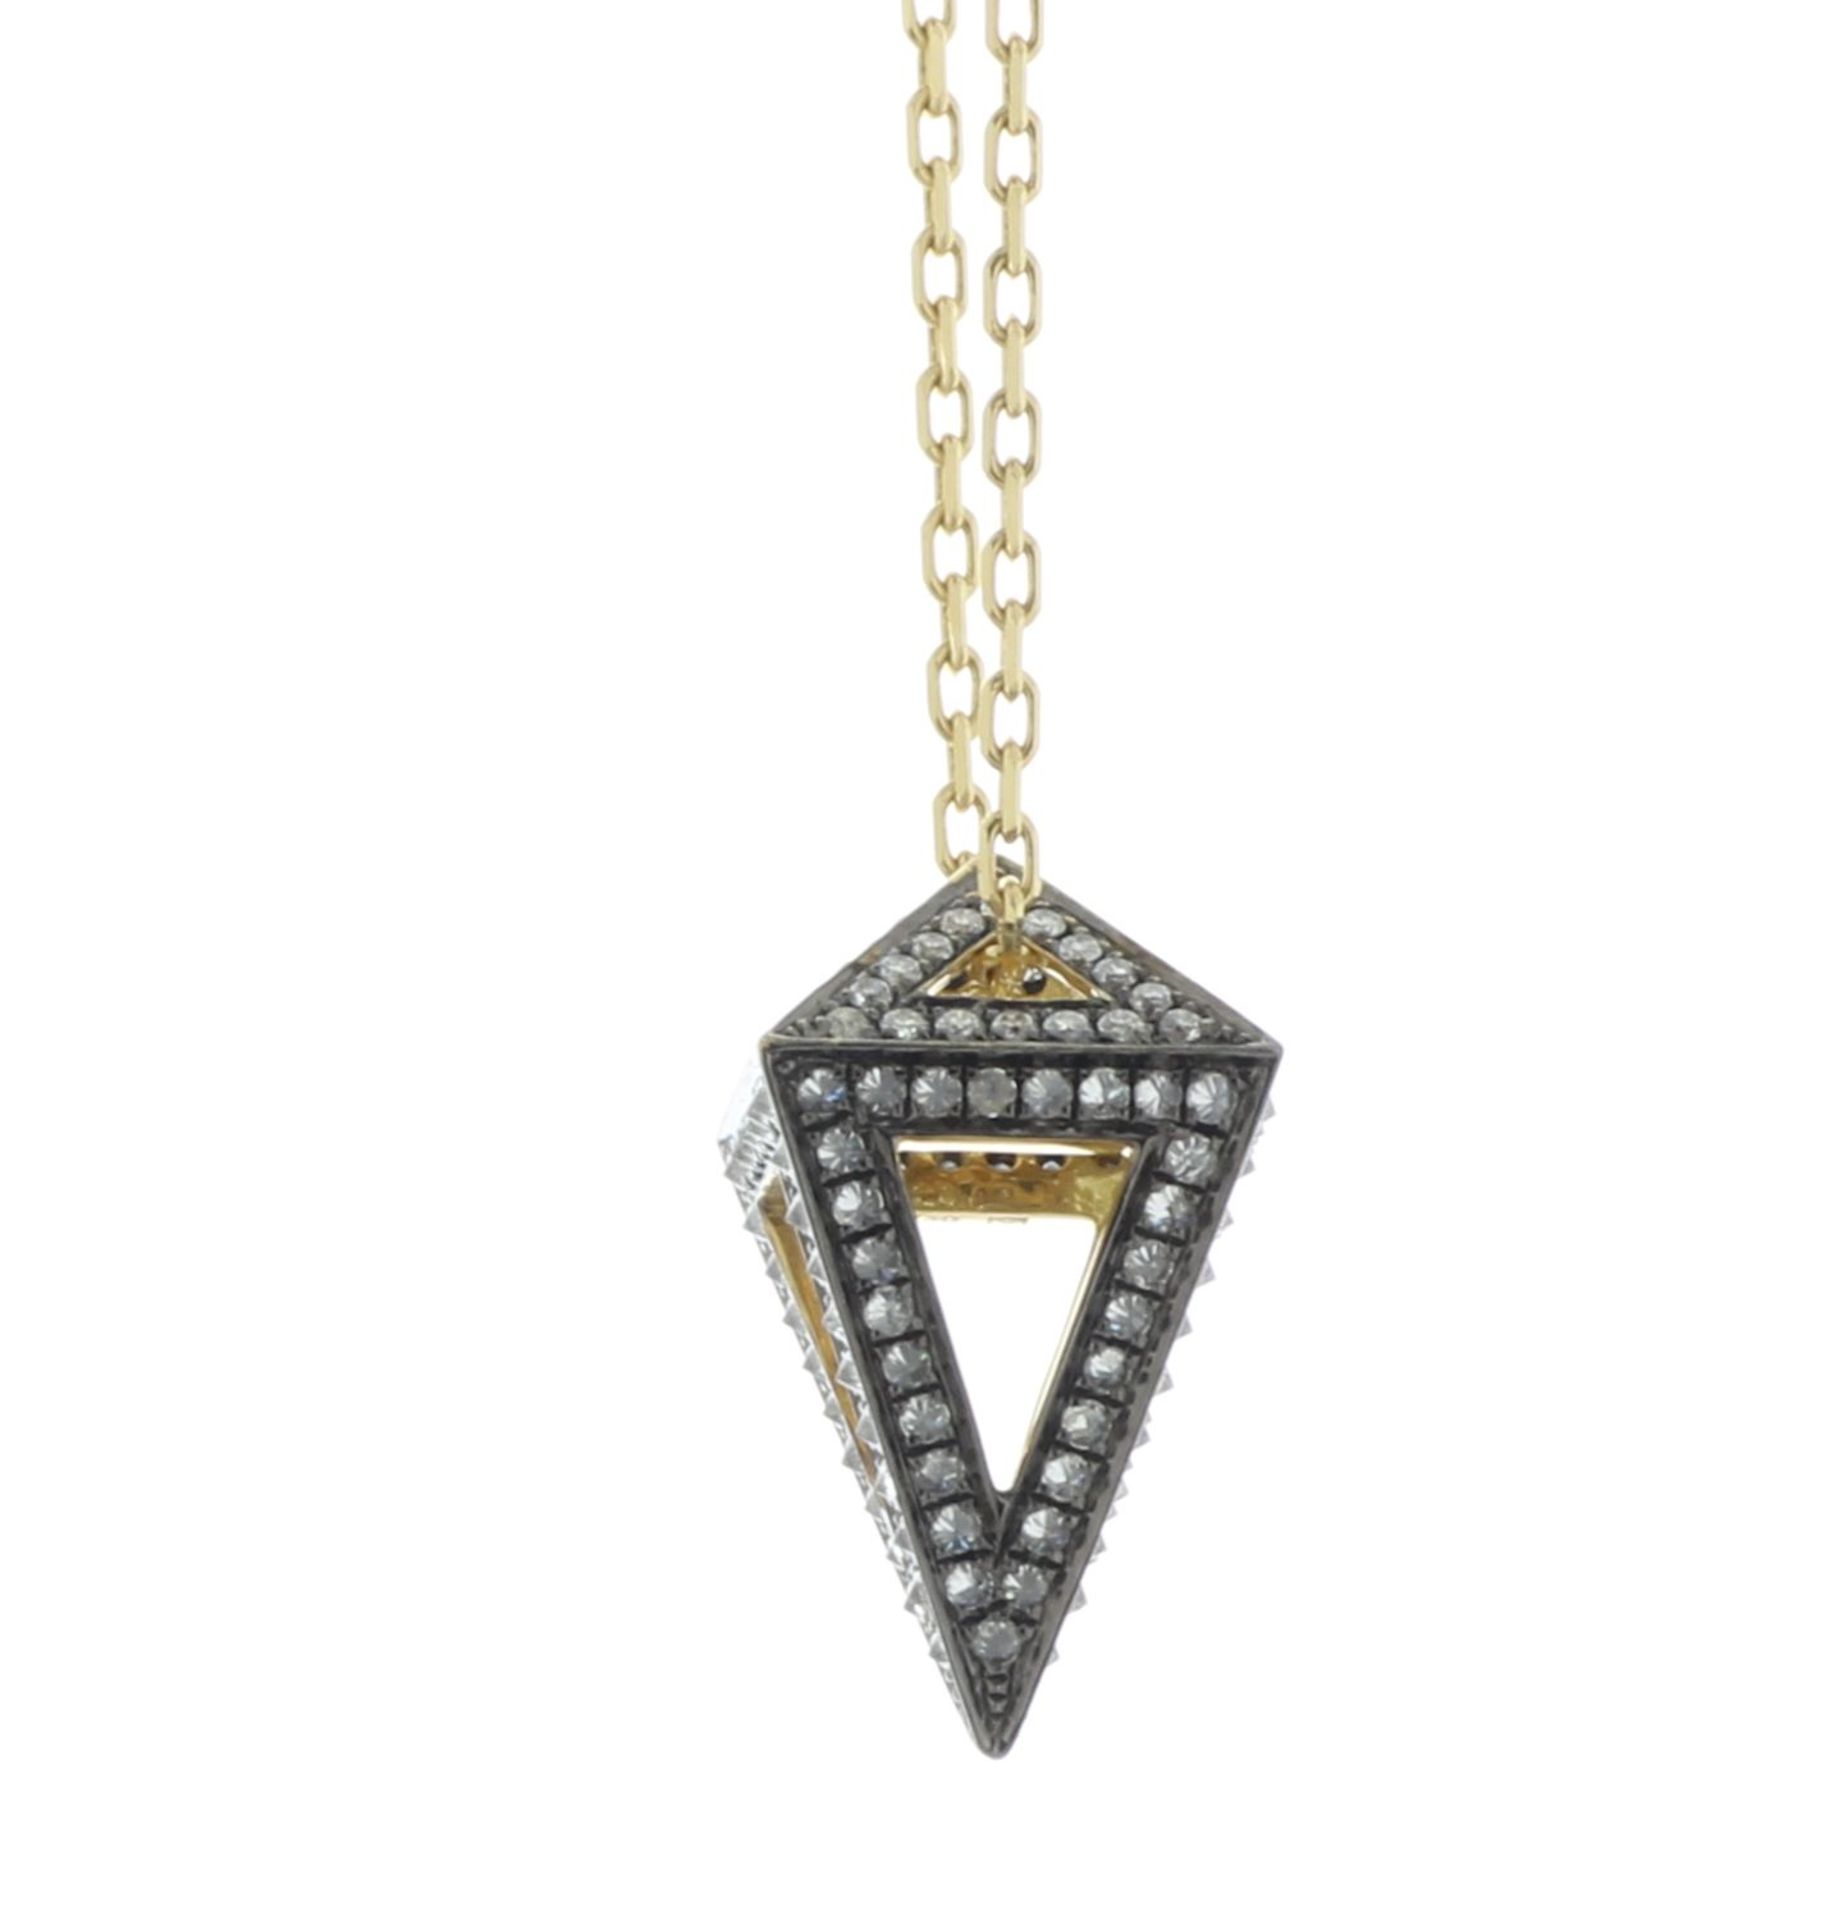 18ct Yellow Gold Noor Diamond Lantern Pendant and Chain 1.75 Carats - Valued By AGI £6,995.00 - This - Image 2 of 5